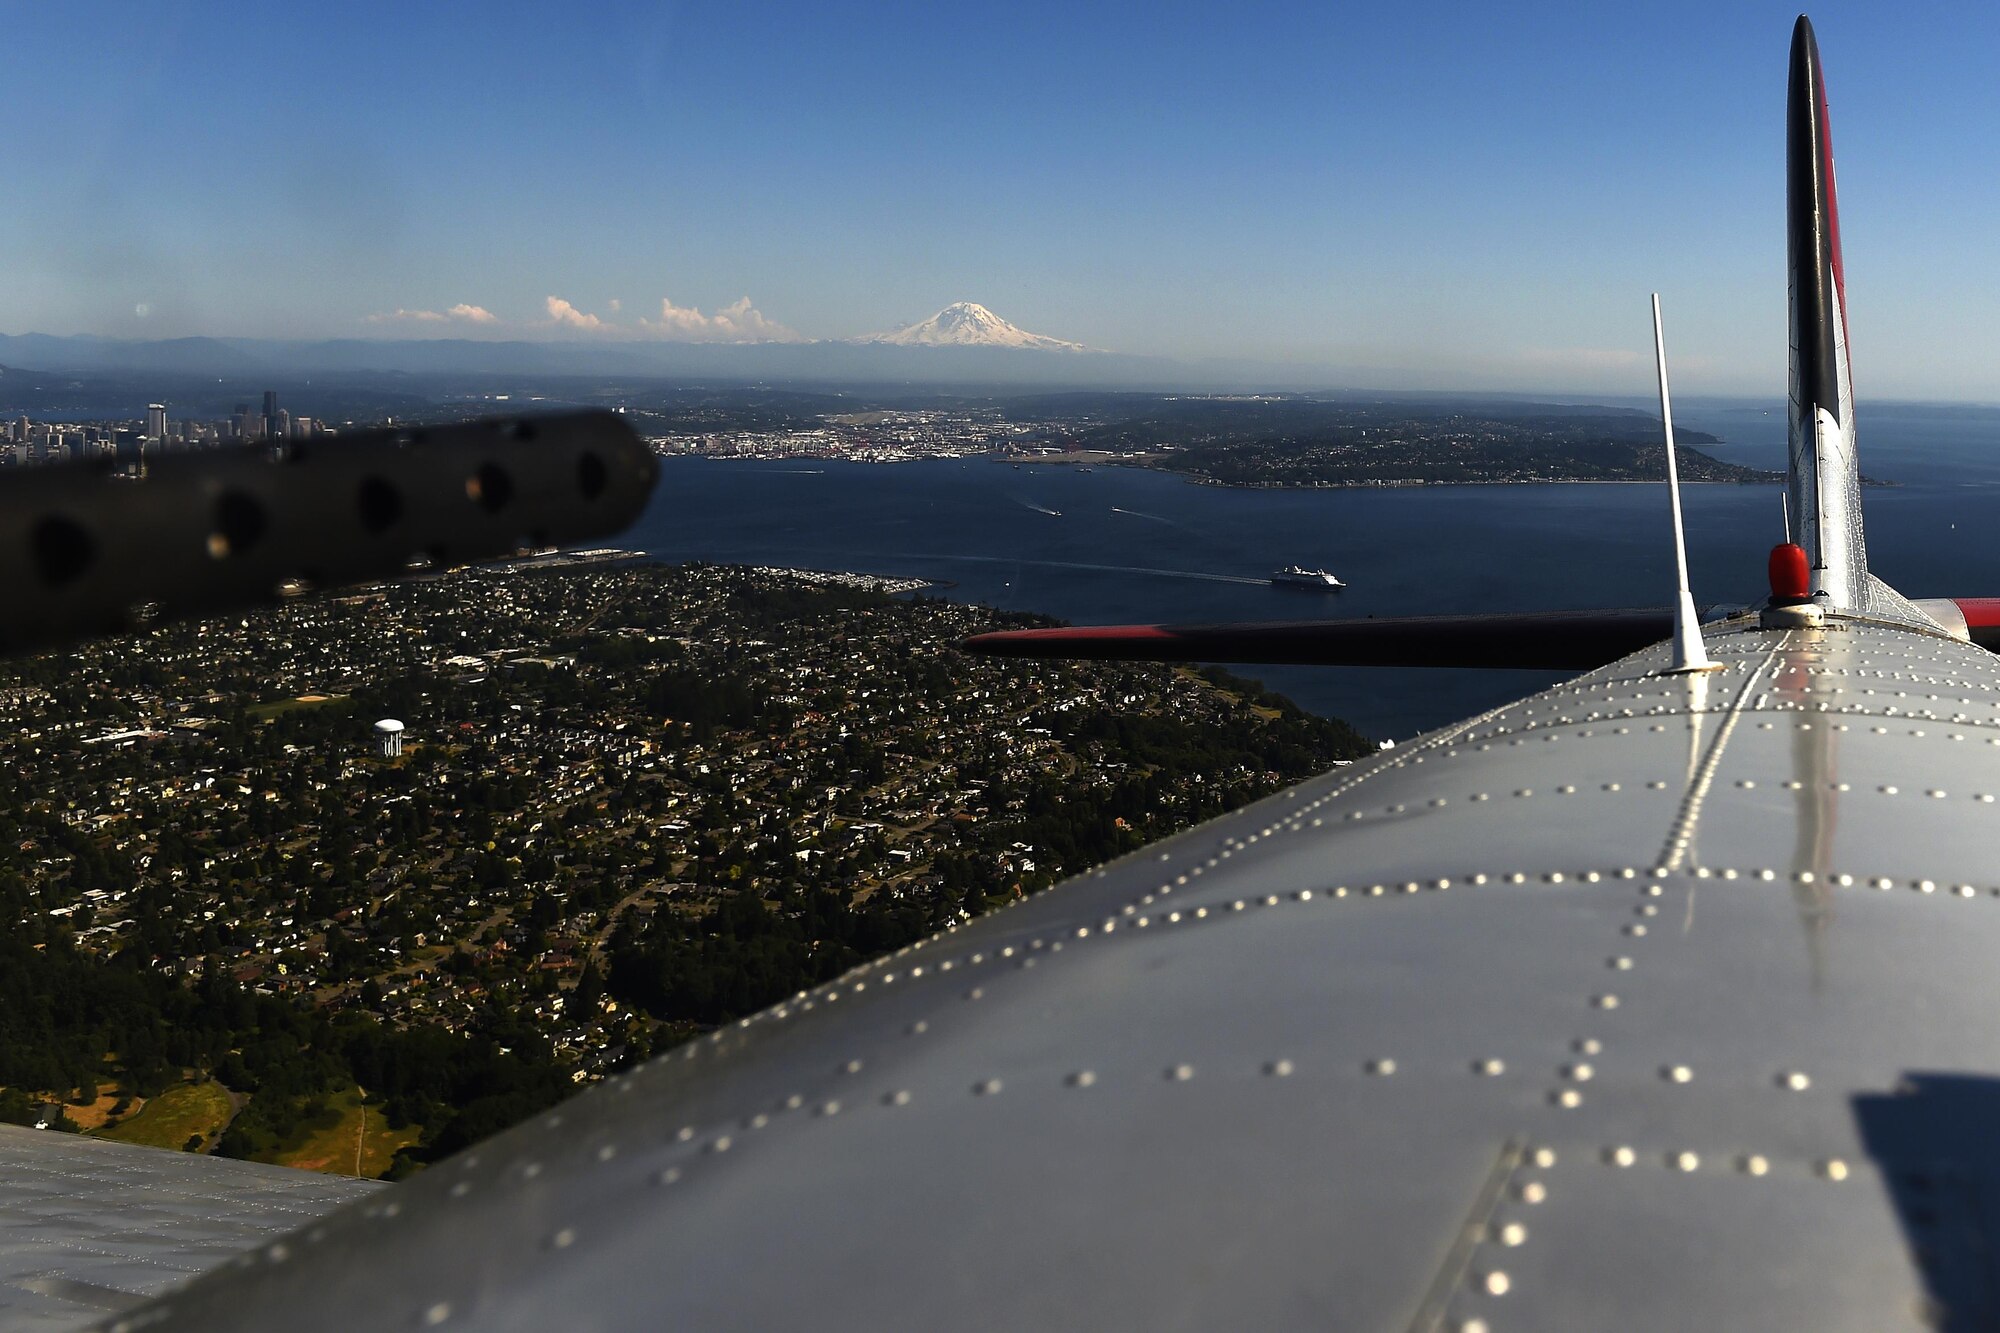 A B-17 Flying Fortress flies over Seattle, Wash., June 6, 2016. The B-17 had 13, 50-caliber M2 Browning machine guns for defense. The long range capabilities of the B-17 meant they would often go without fighter plane escorts. (U.S Air Force photo/ Tech. Sgt. Tim Chacon)